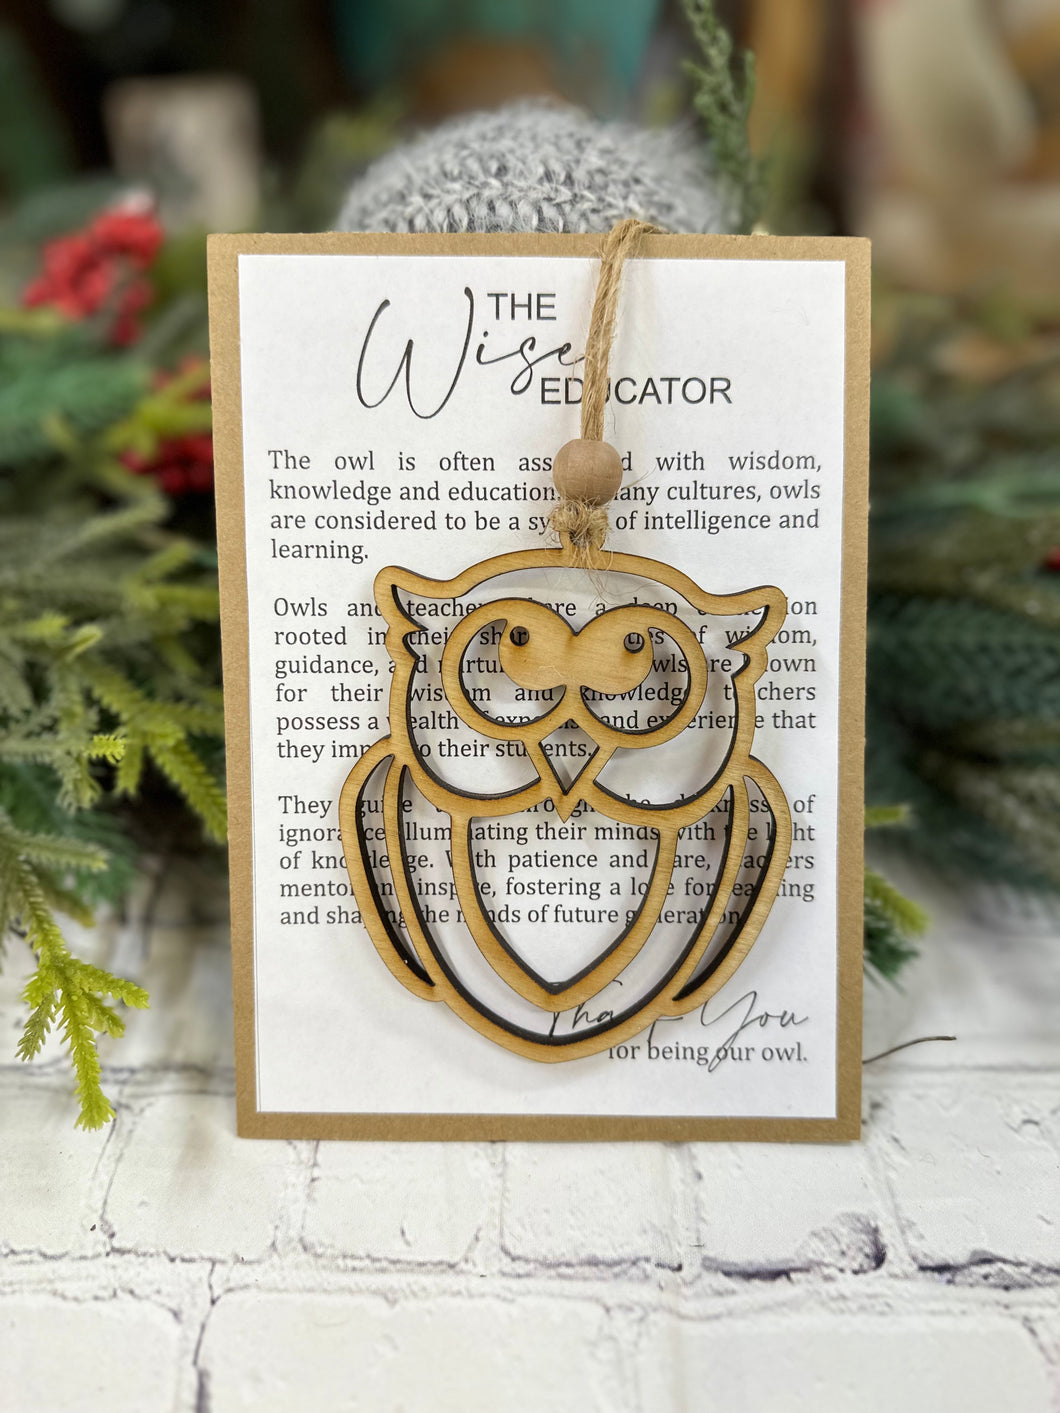 The Wise Educator Owl Ornament